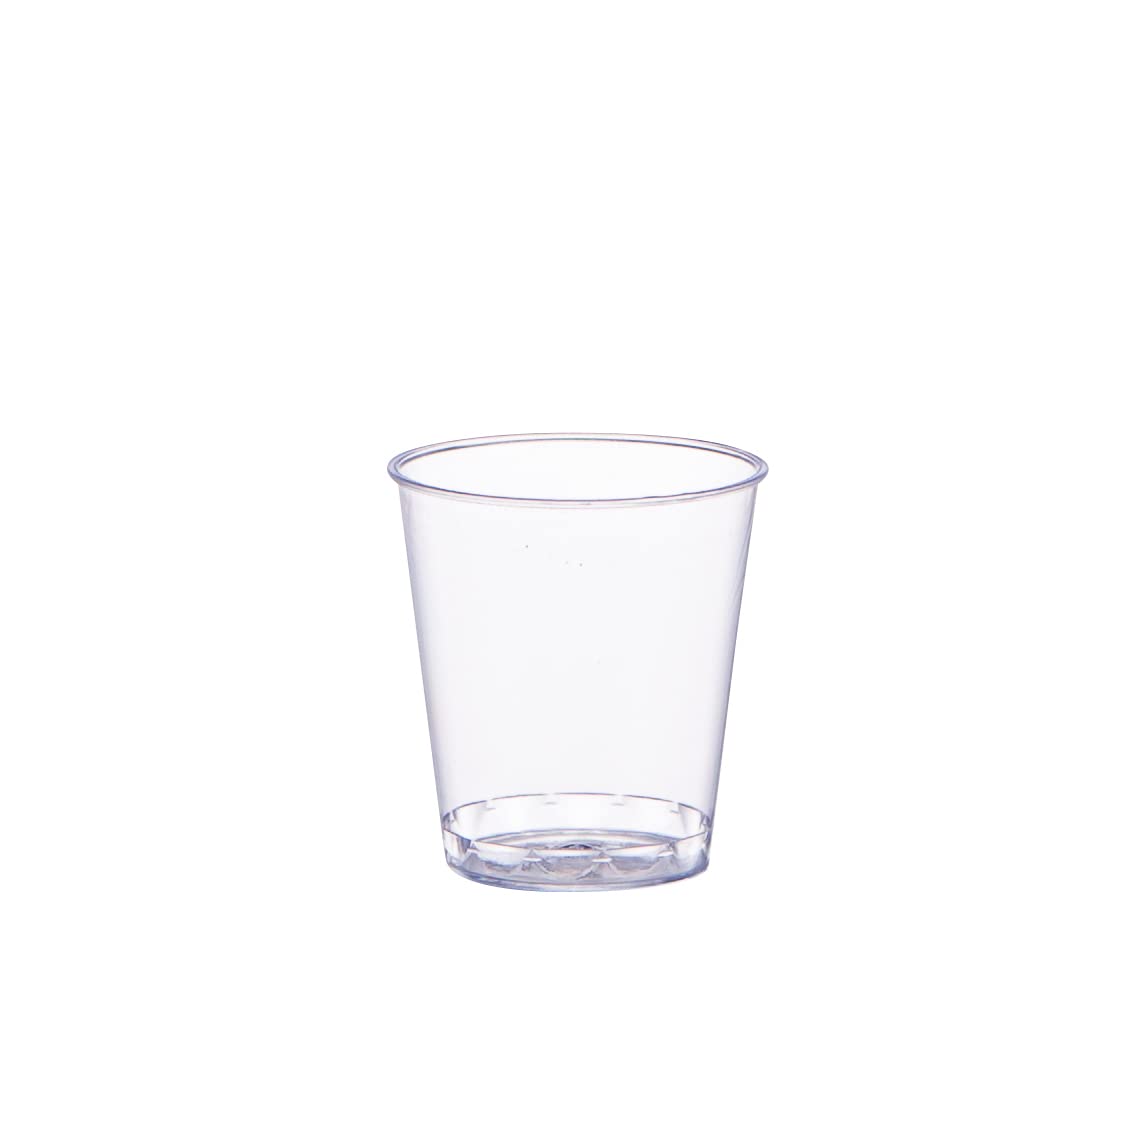 PLA Schnapps Glass with markings 2-4 cl - 40 pcs/cs